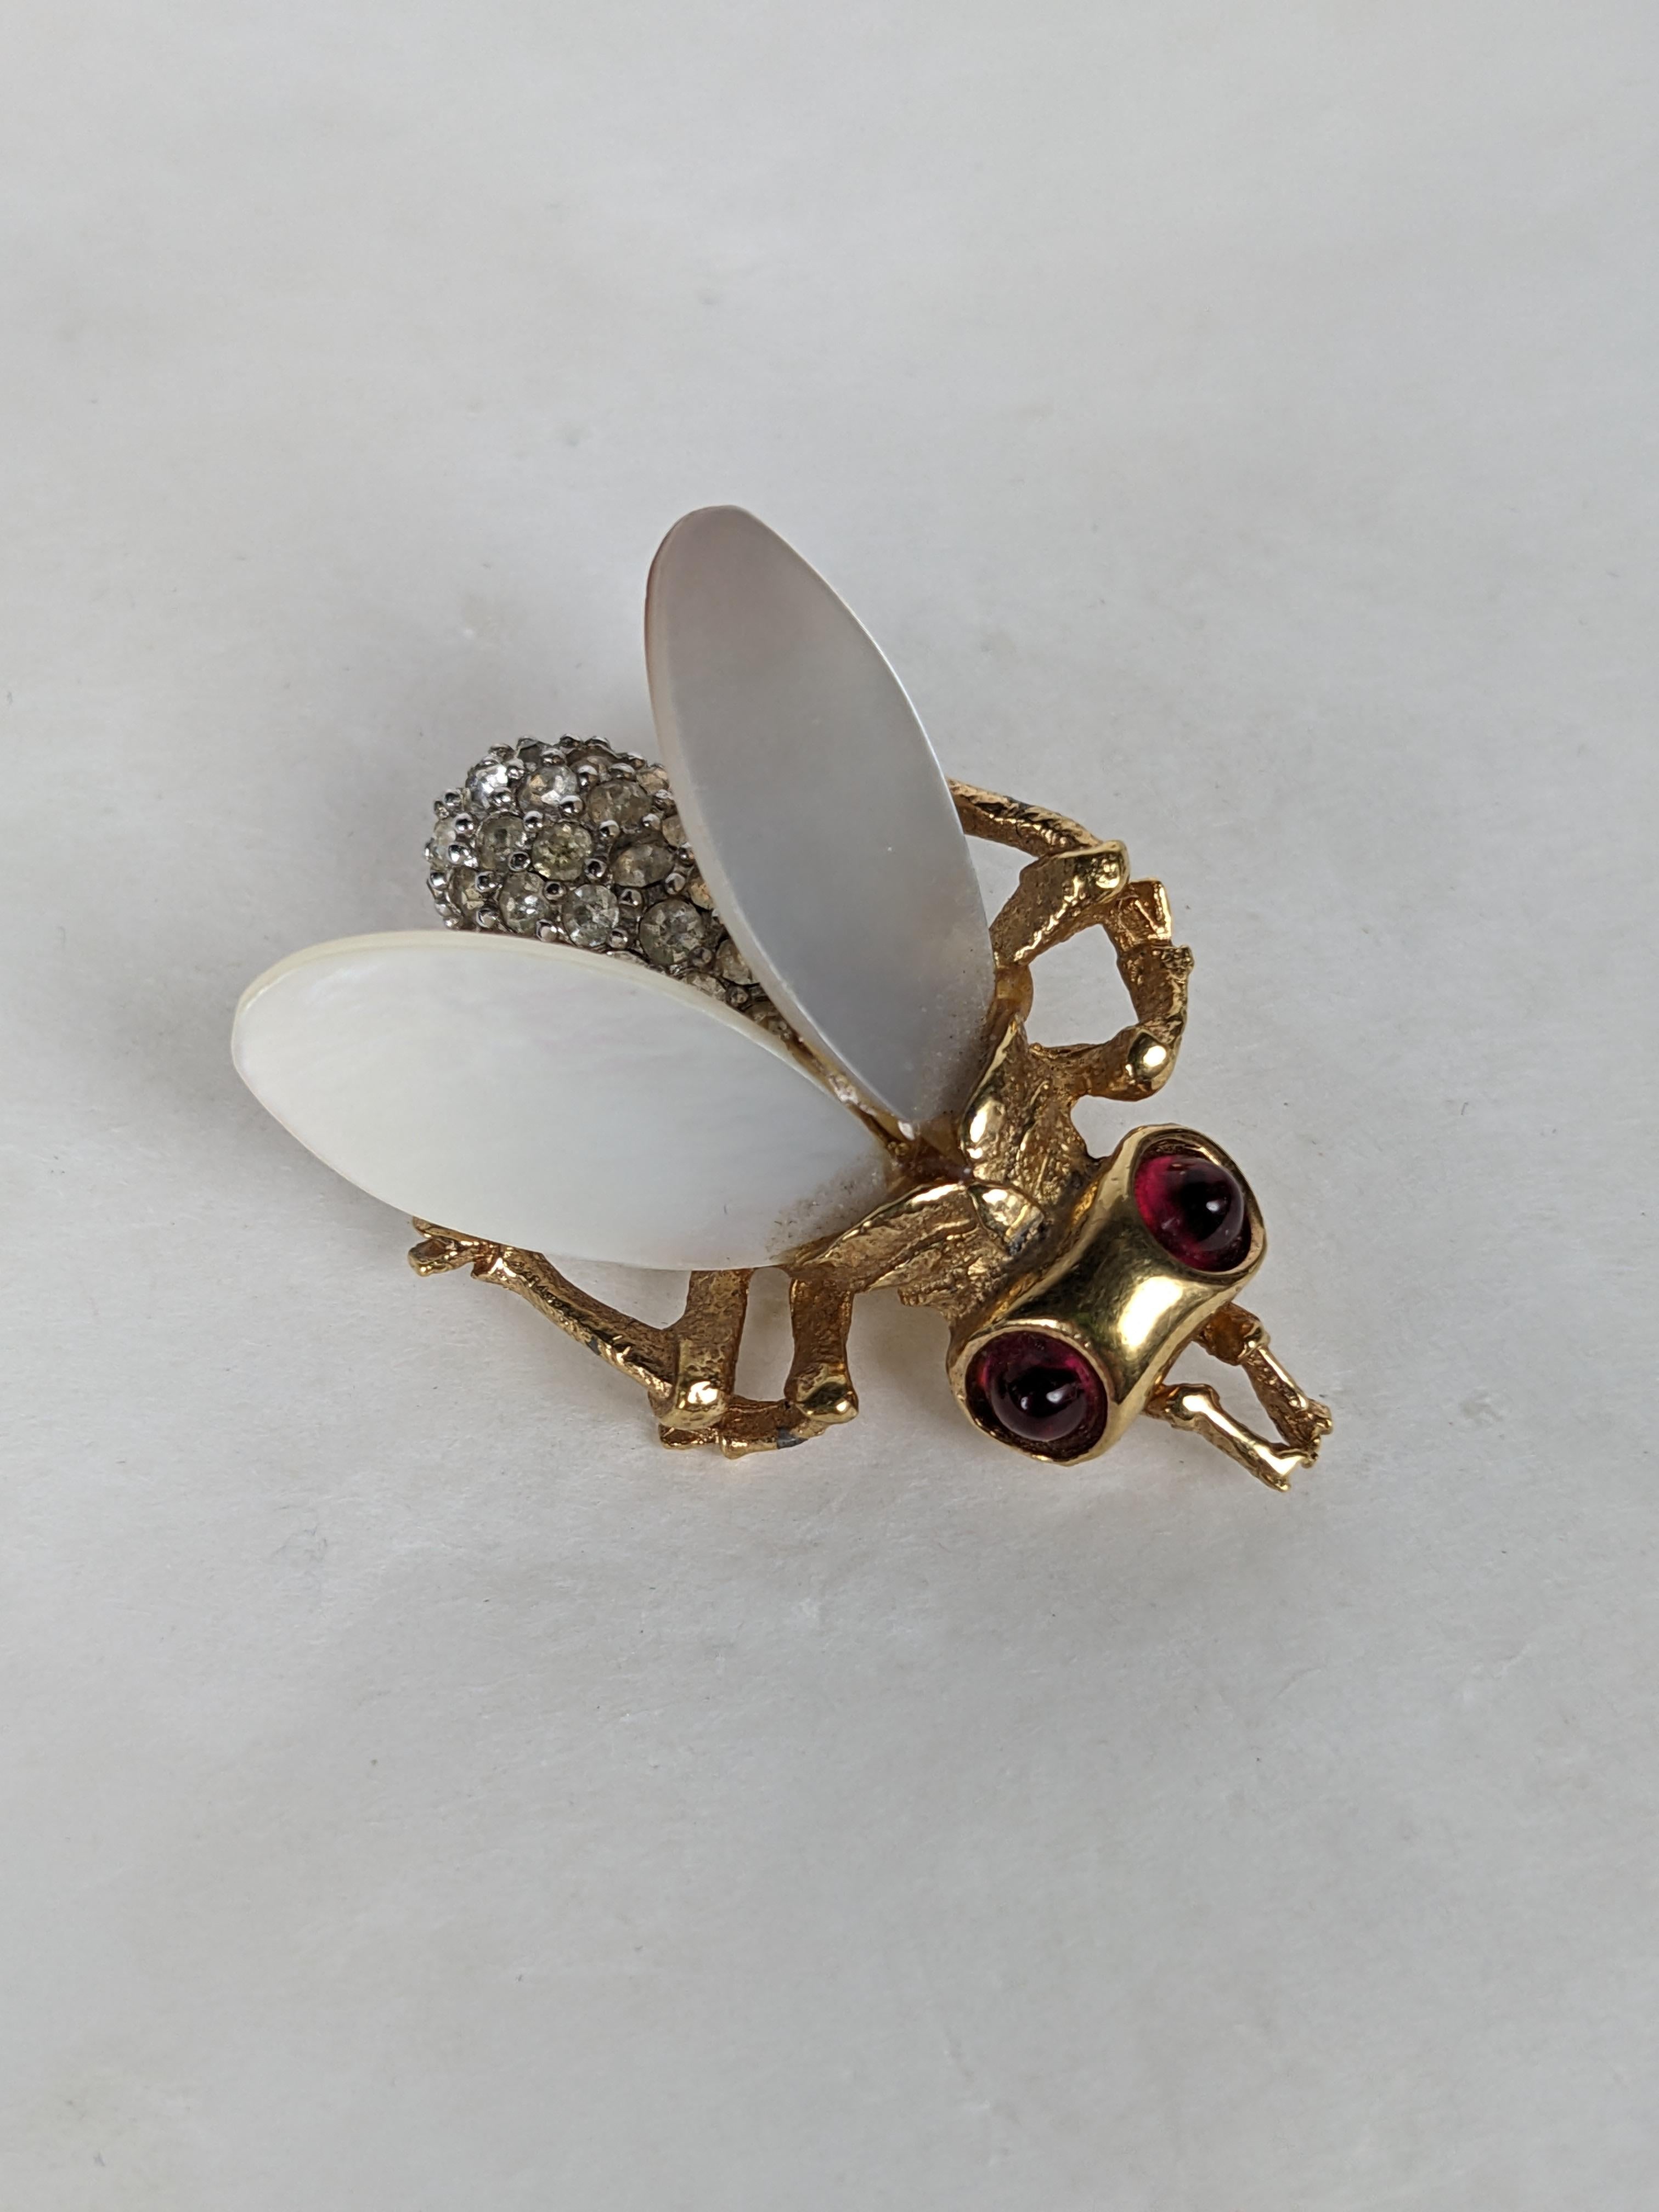 Charming Marcel Boucher Mother of Pearl Pave Bee from the 1960's. Wonderfully detailed with pave crystal body, mother of pearl wings and faux ruby cab eyes. 1.5 x 1